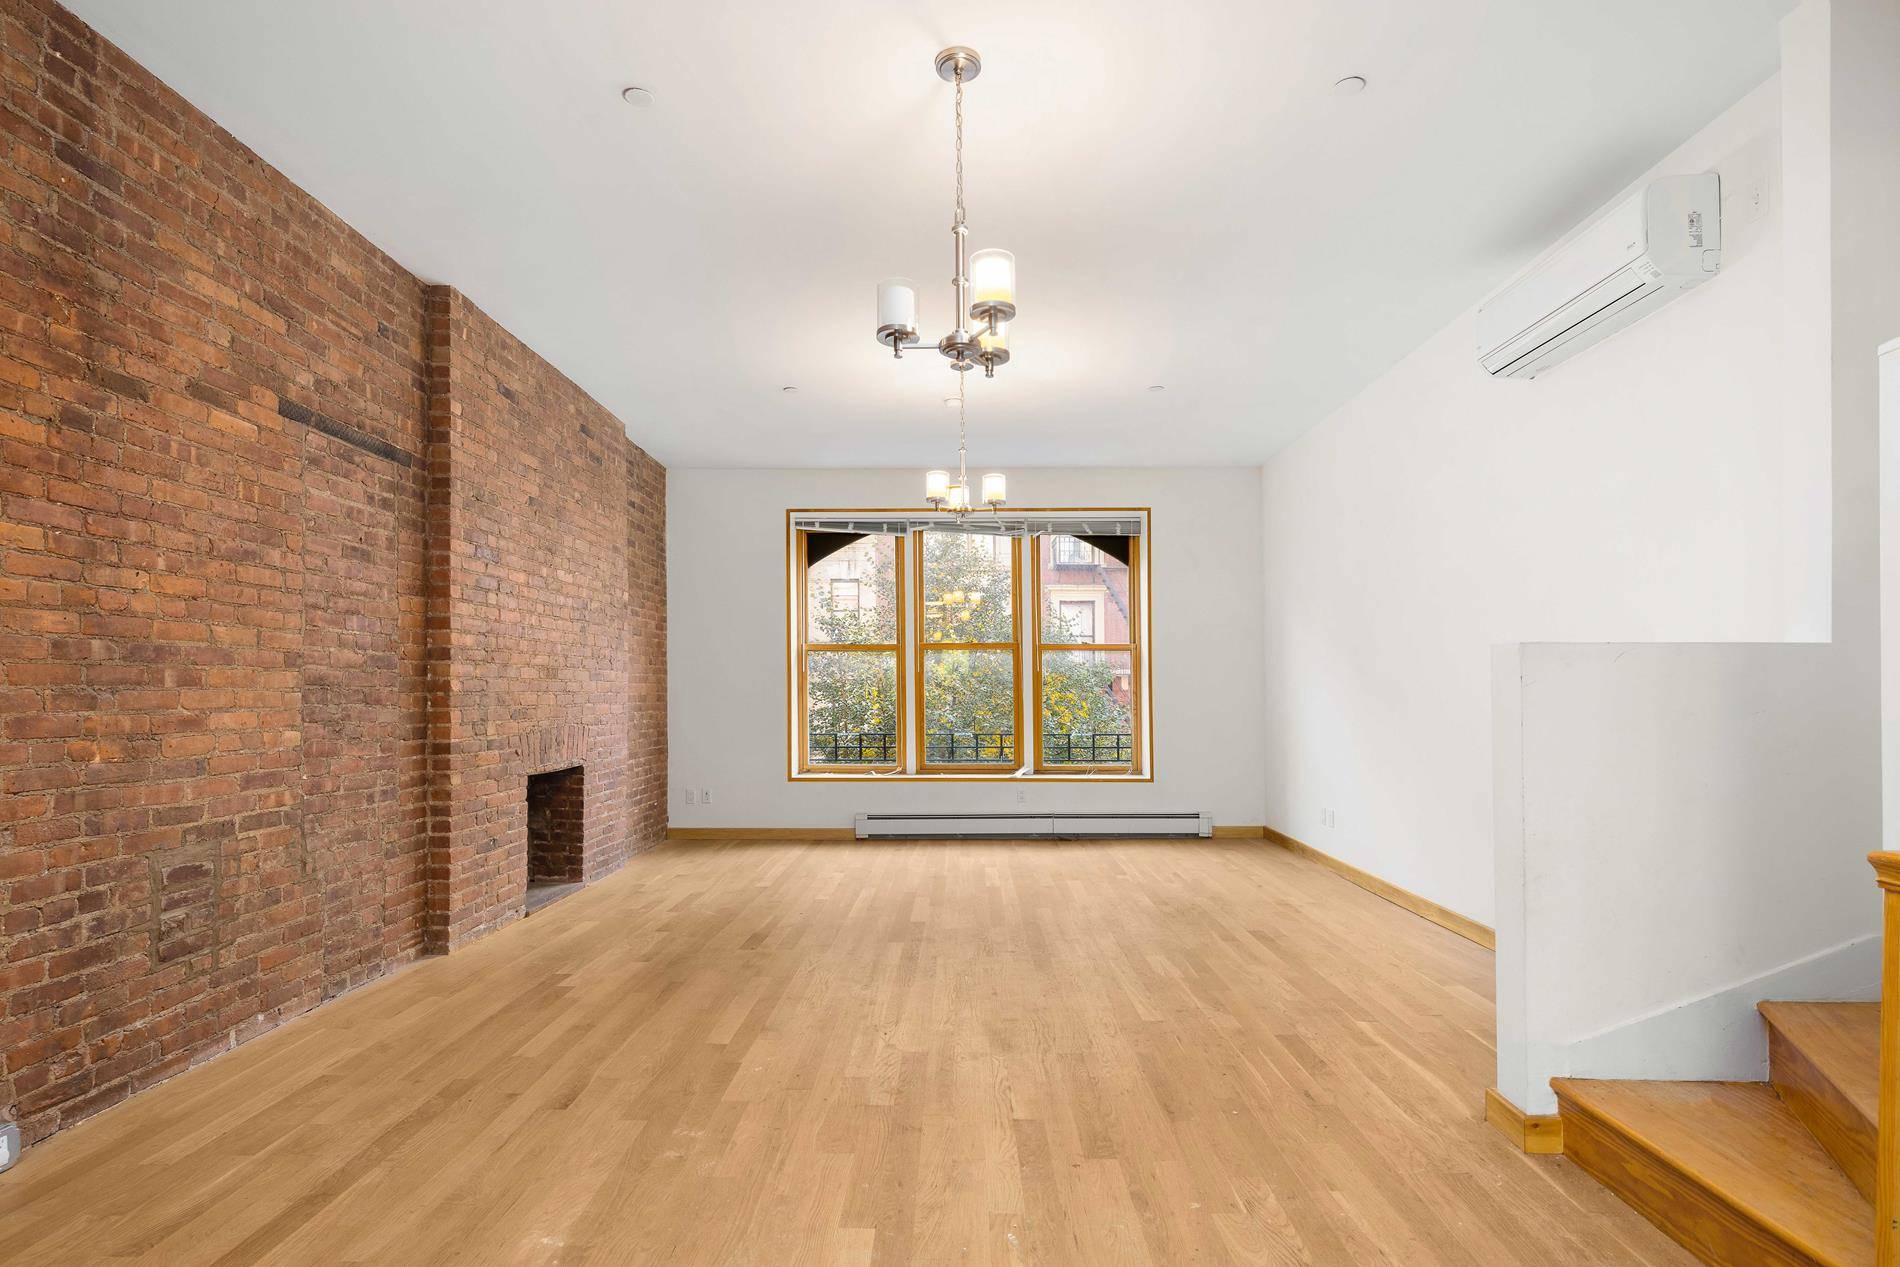 A great opportunity to purchase this beautiful four story brownstone in South Harlem steps away from Morningside Park.